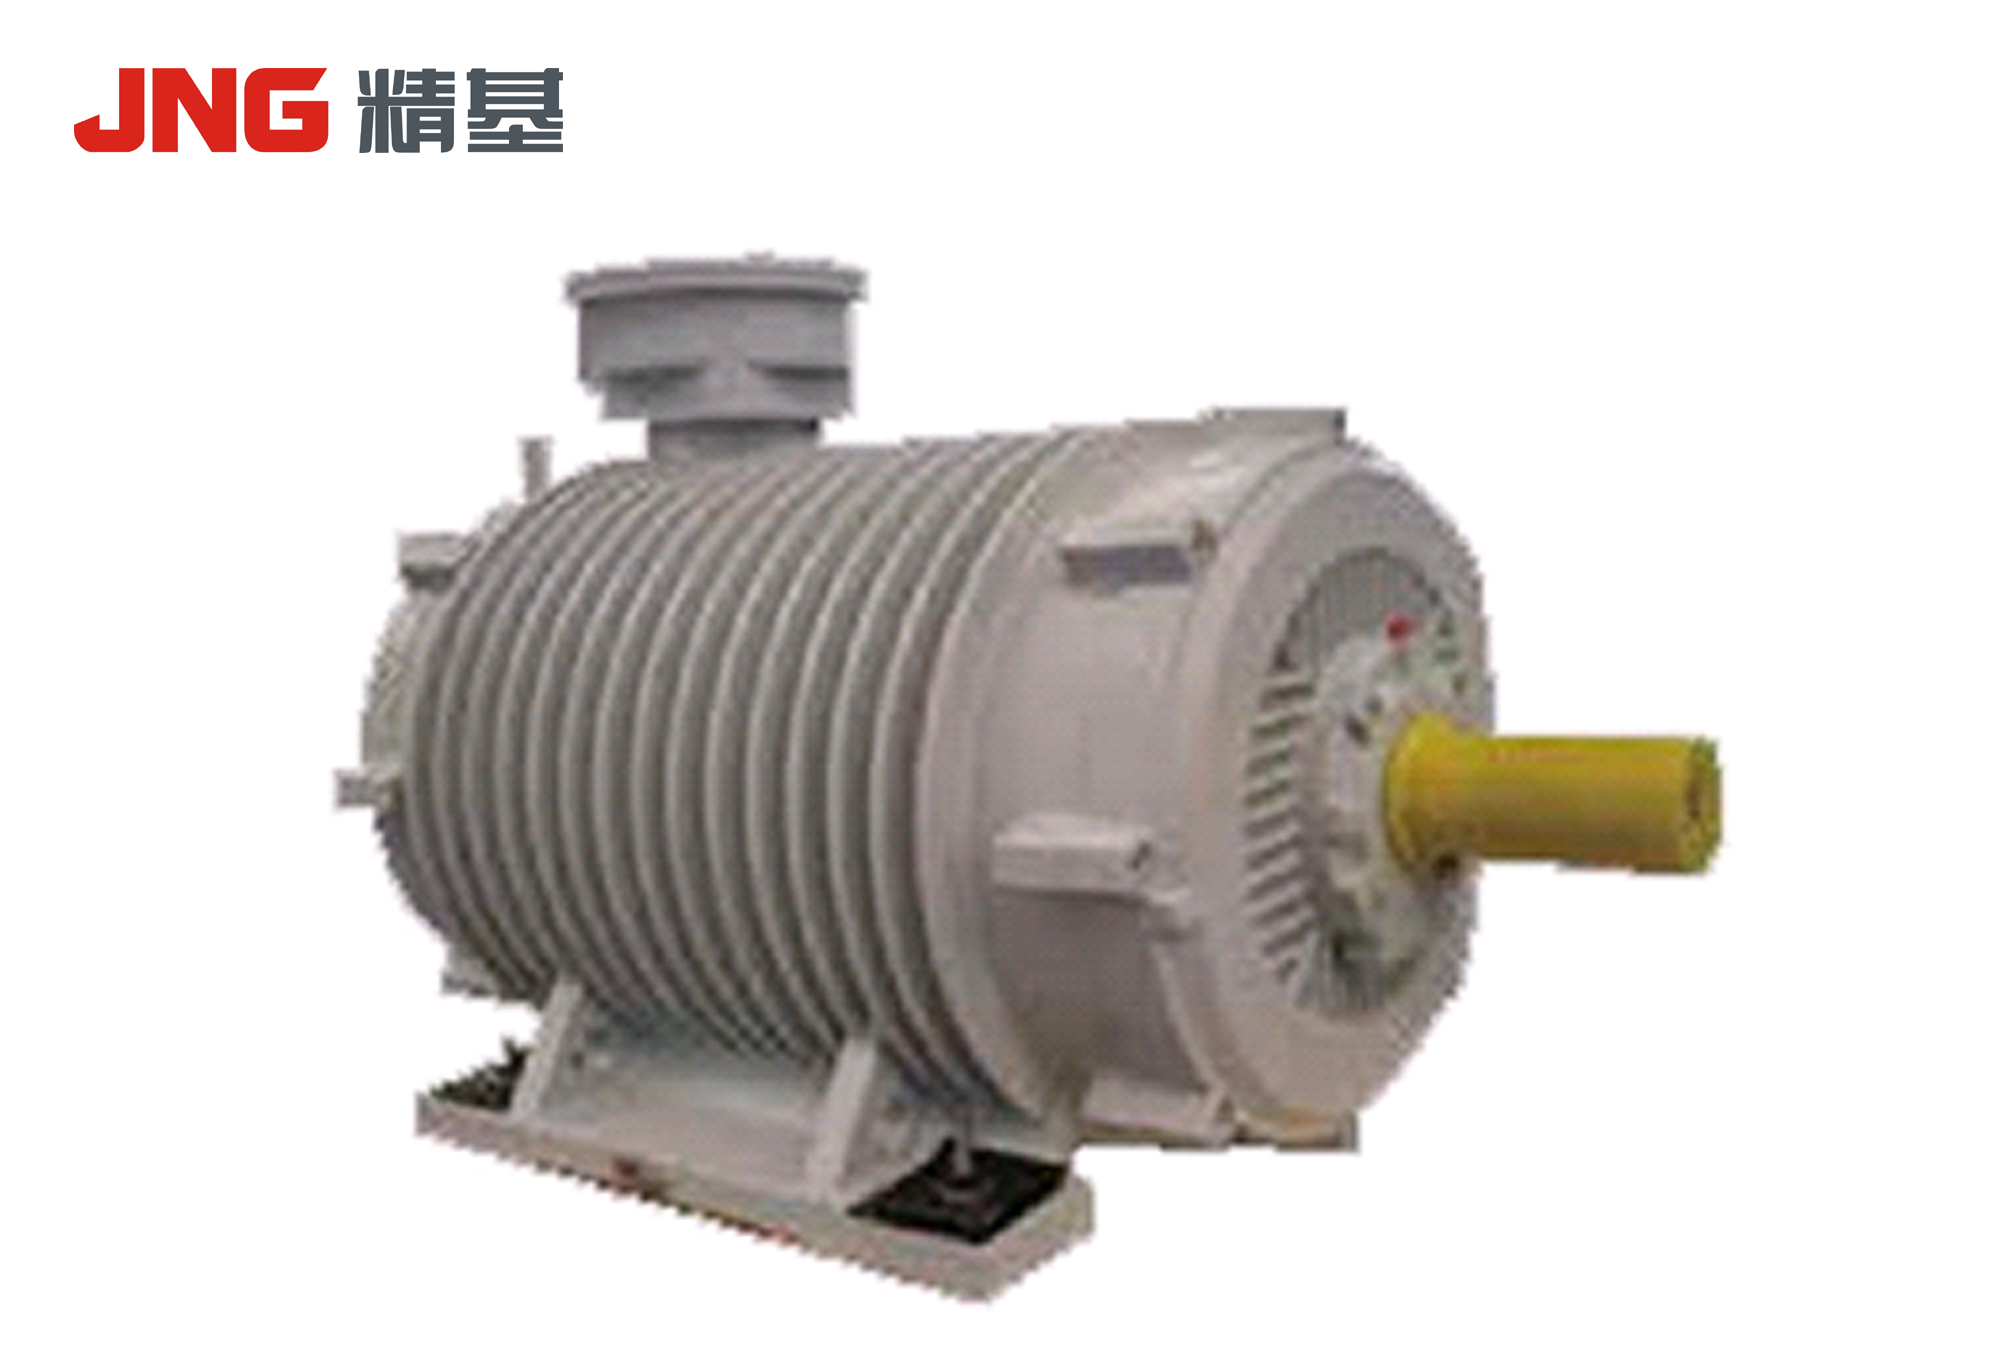 Three-phase permanent magnet synchronous motor for tensioning gear